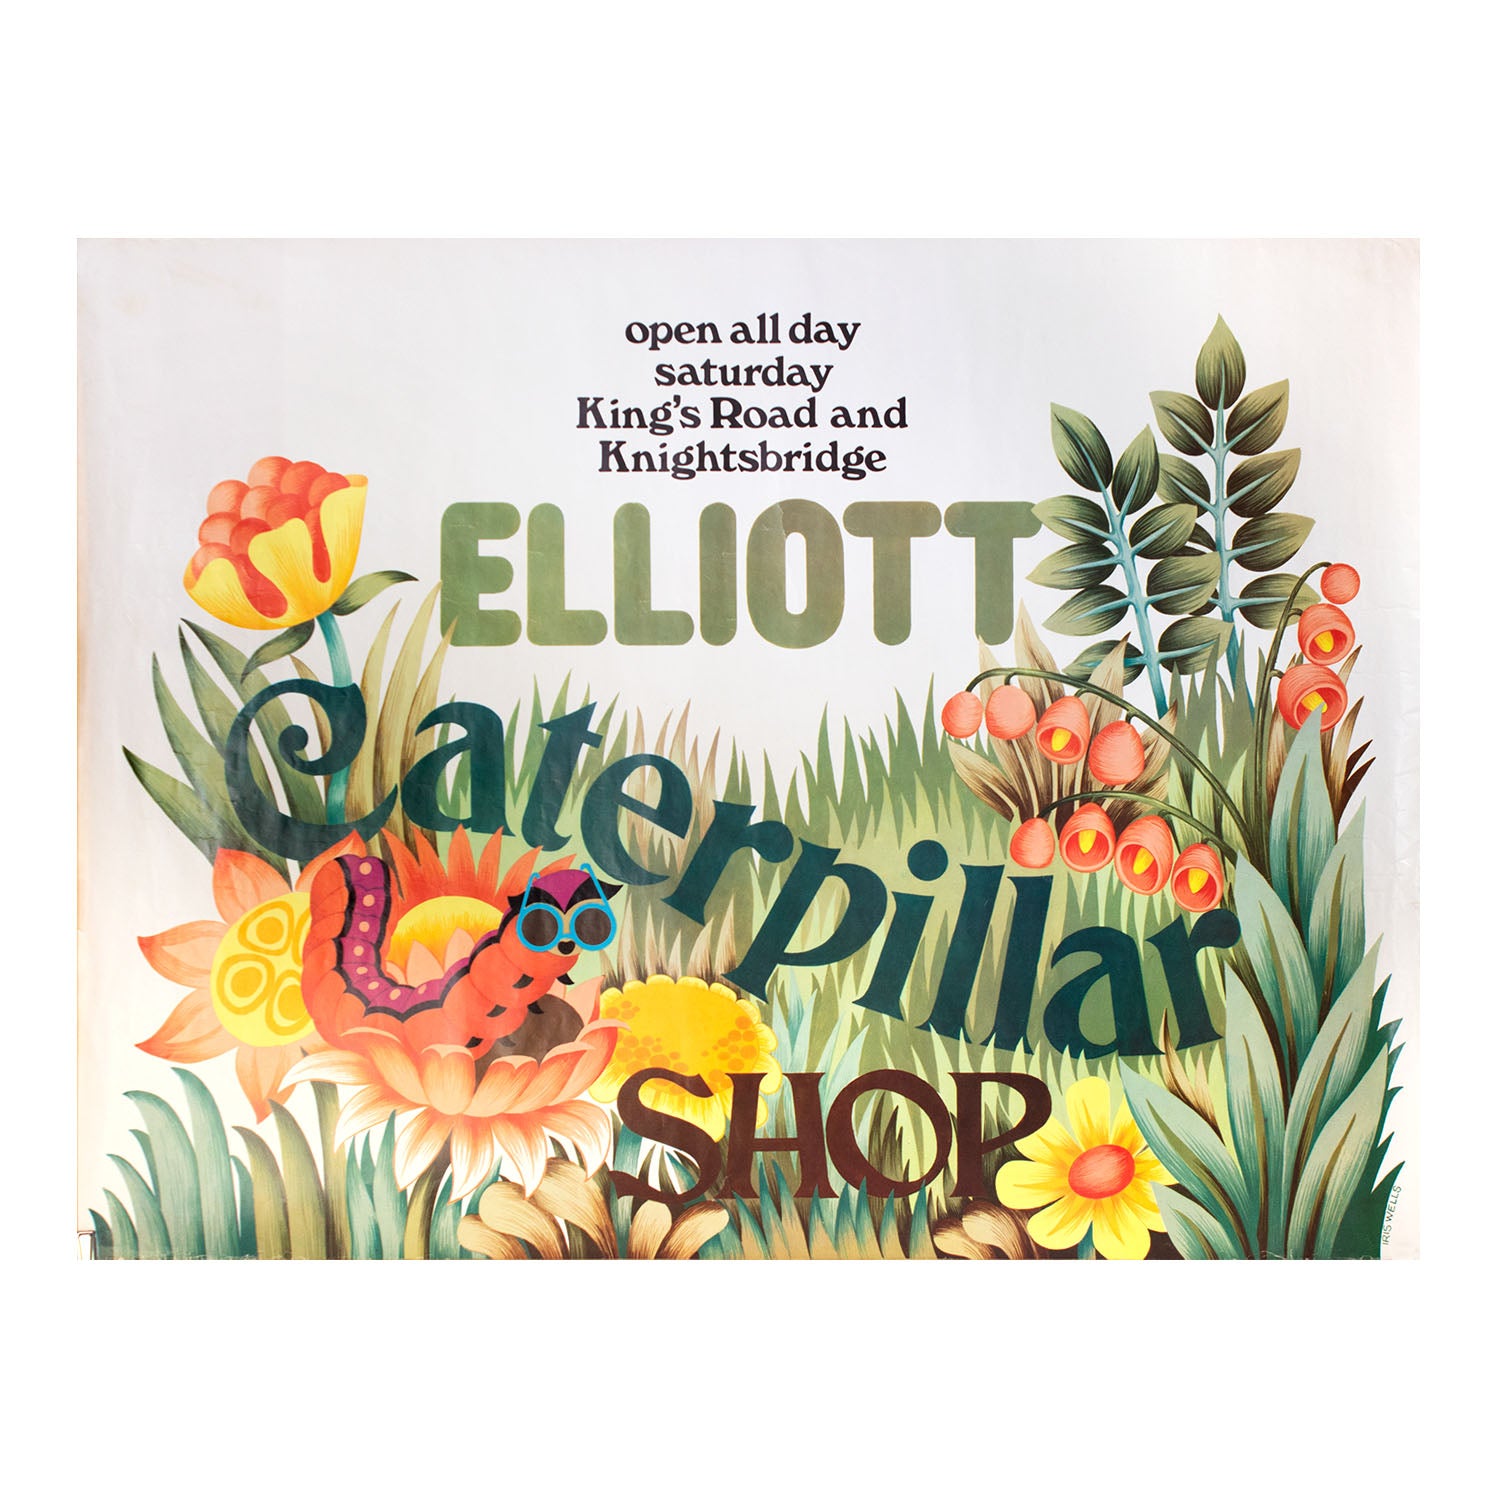 An original poster for Elliott's new 'Caterpillar Shop' designed by Iris Wells in 1969. The image is a colourful representation of a sunglasses wearing caterpillar crawling among the vegetation.